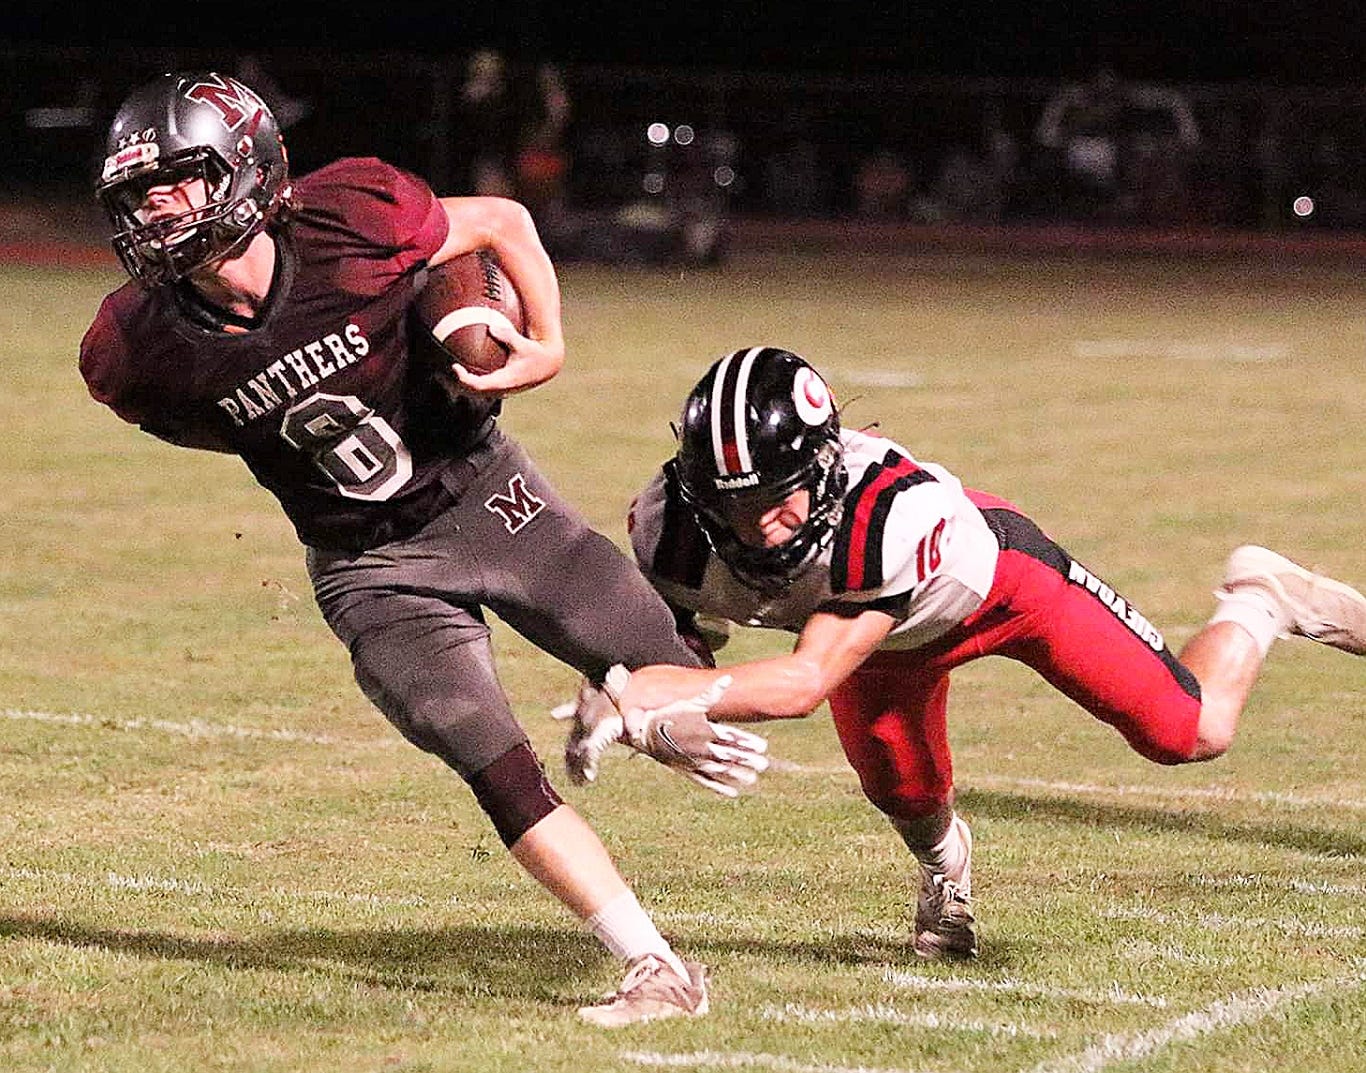 Merryville running back Dakota Thompson (8) attempts to break away from a tackle along the sideline during the Panthers' loss to the Gueydan.